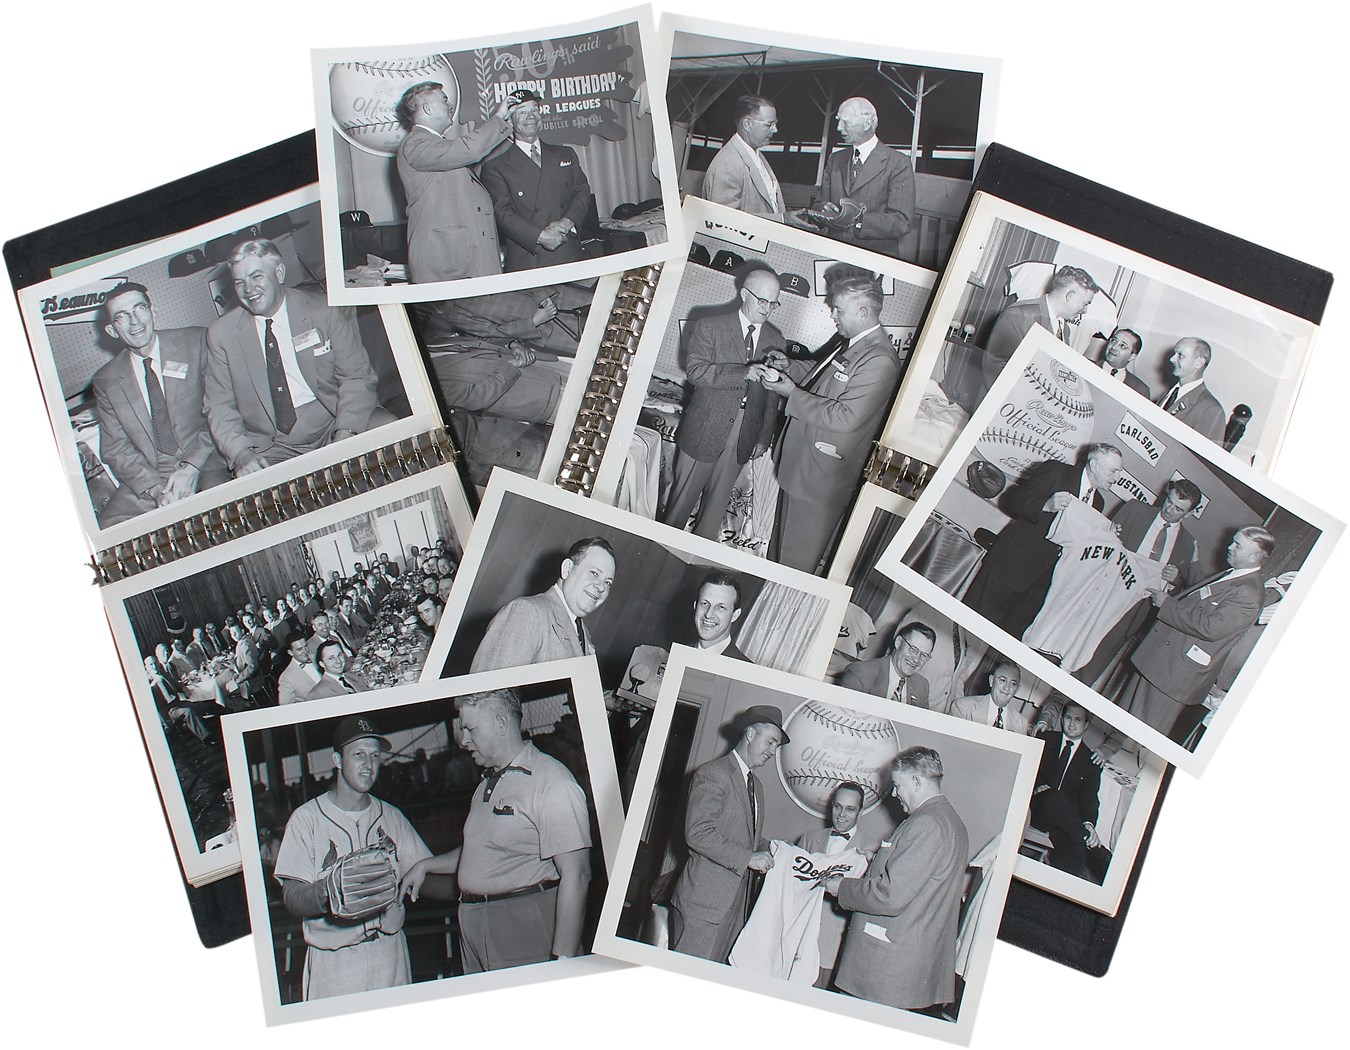 1951 Rawlings Golden Jubilee Promotional Photo Binders Featuring Players & "Trade Show Equipment Displays" (135 photos)